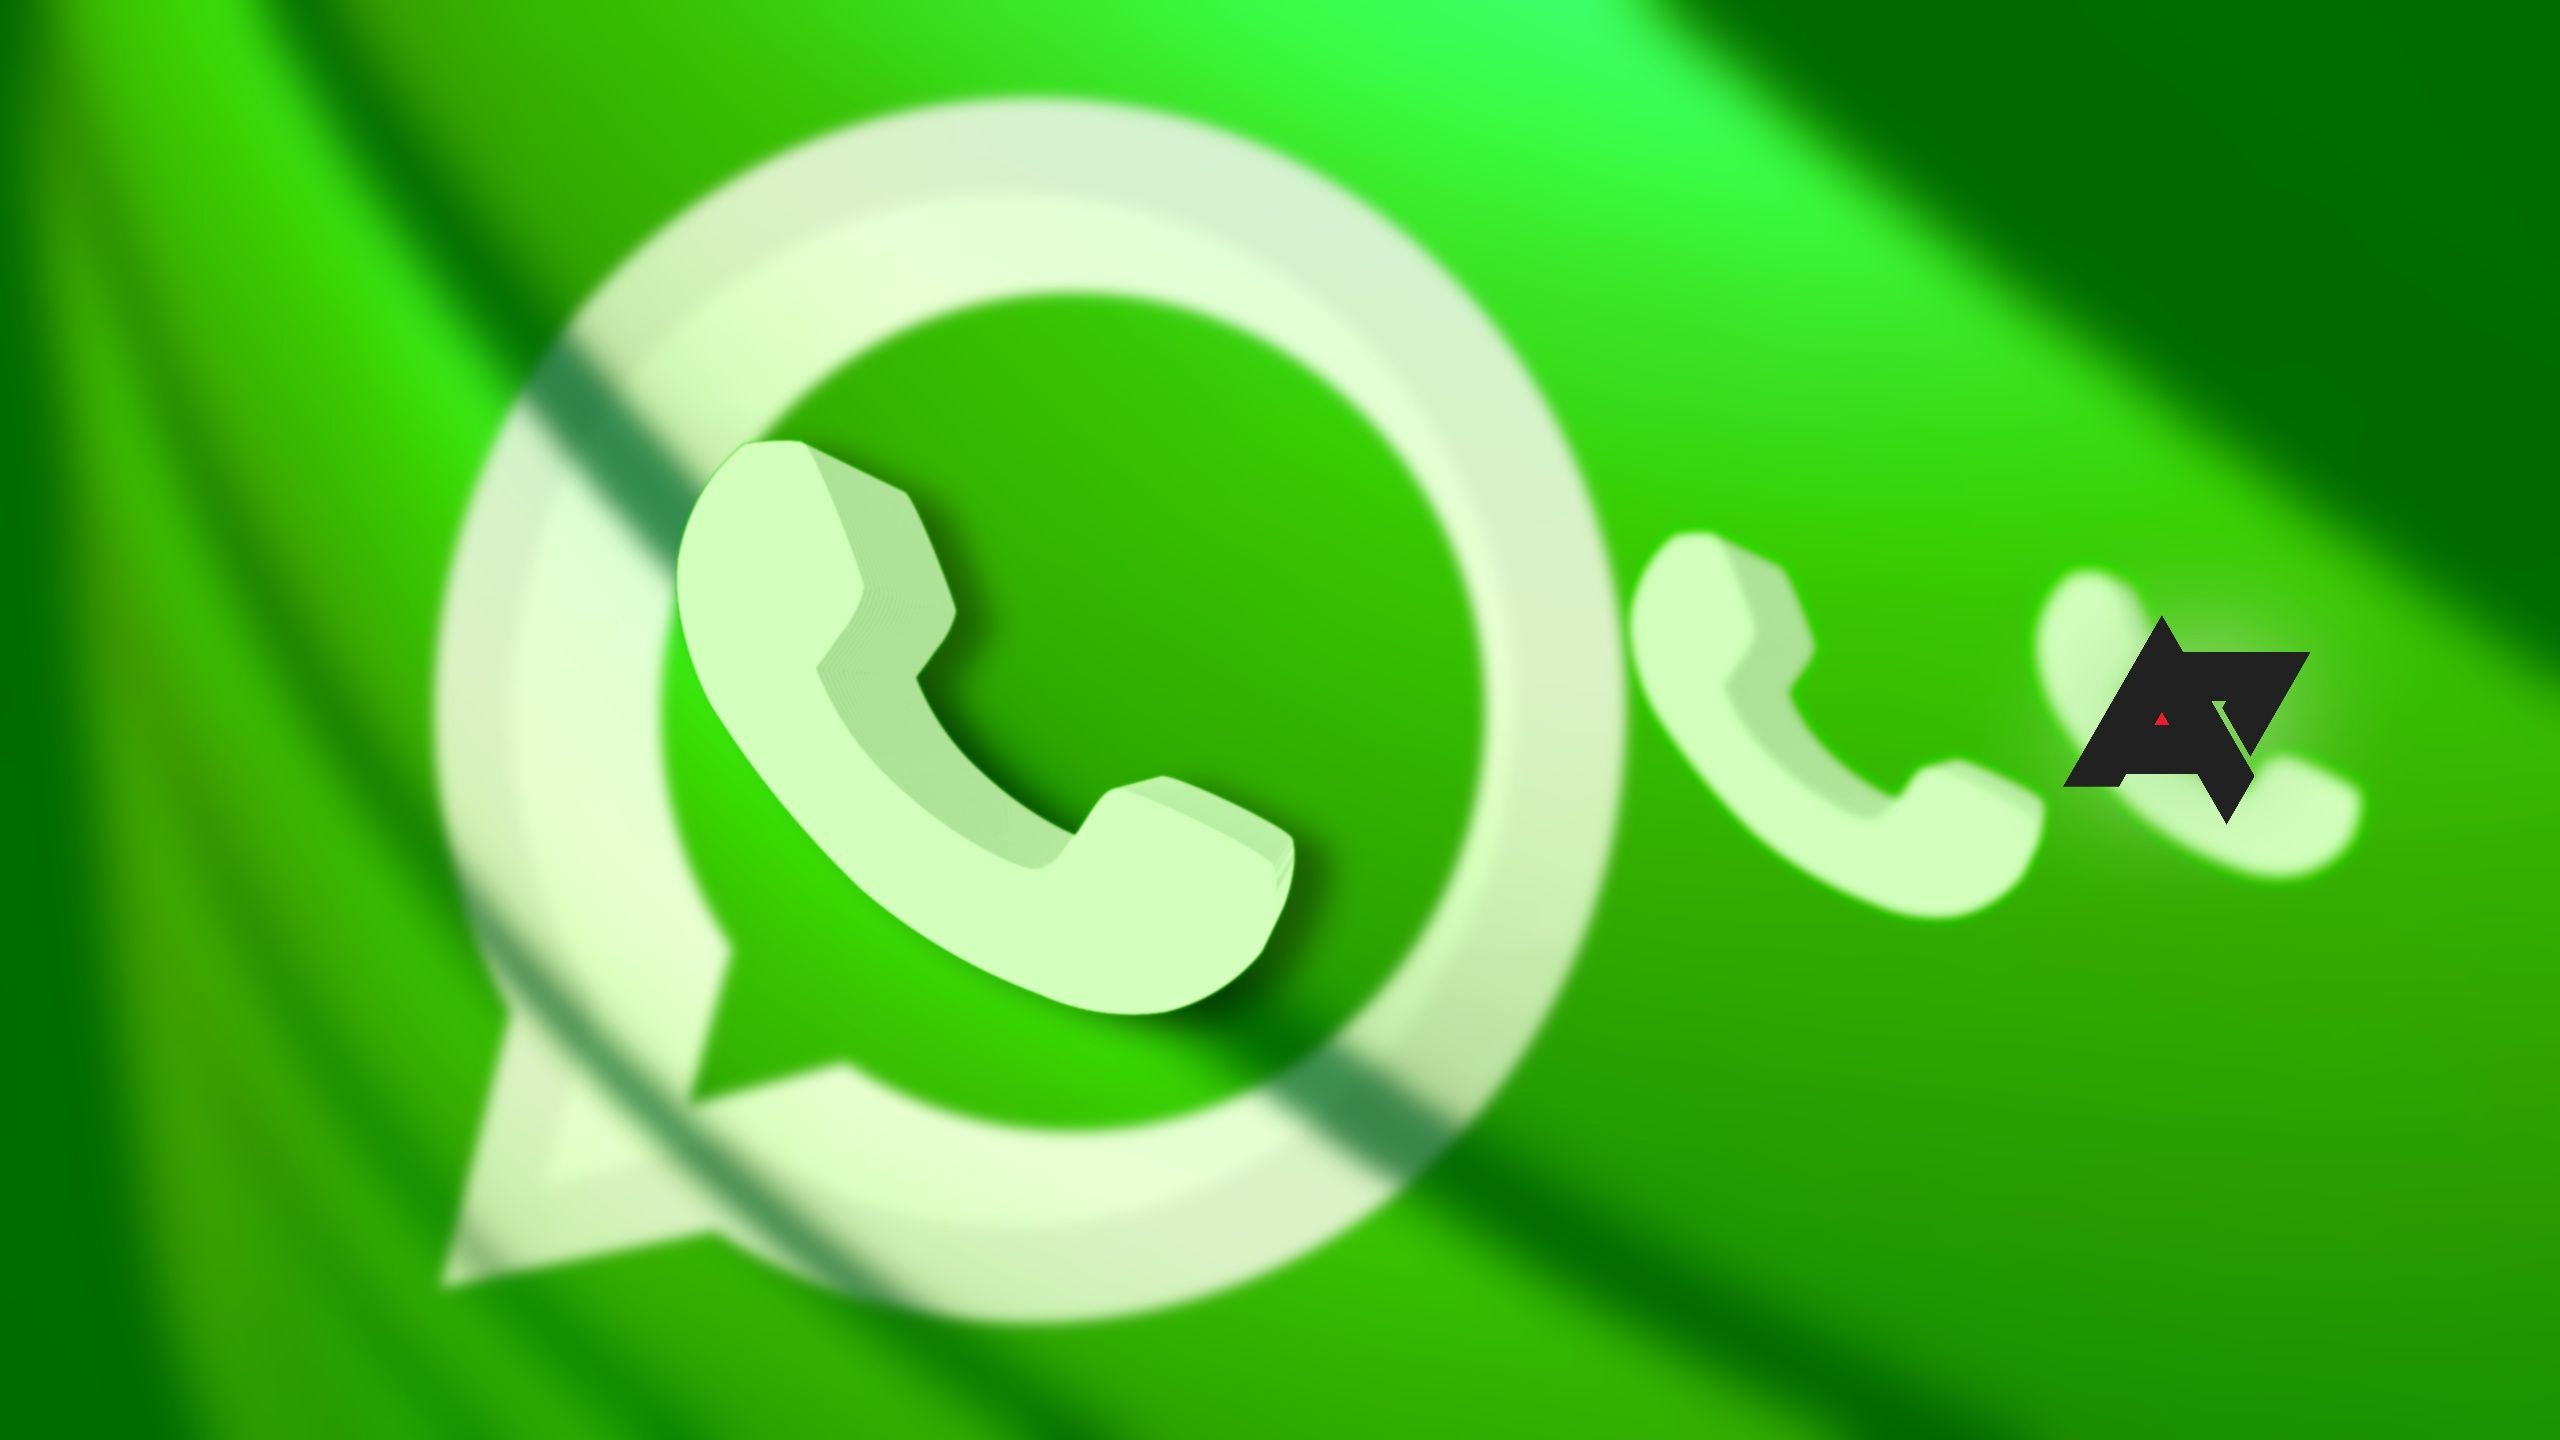 5 tips to boost security and privacy when using WhatsApp